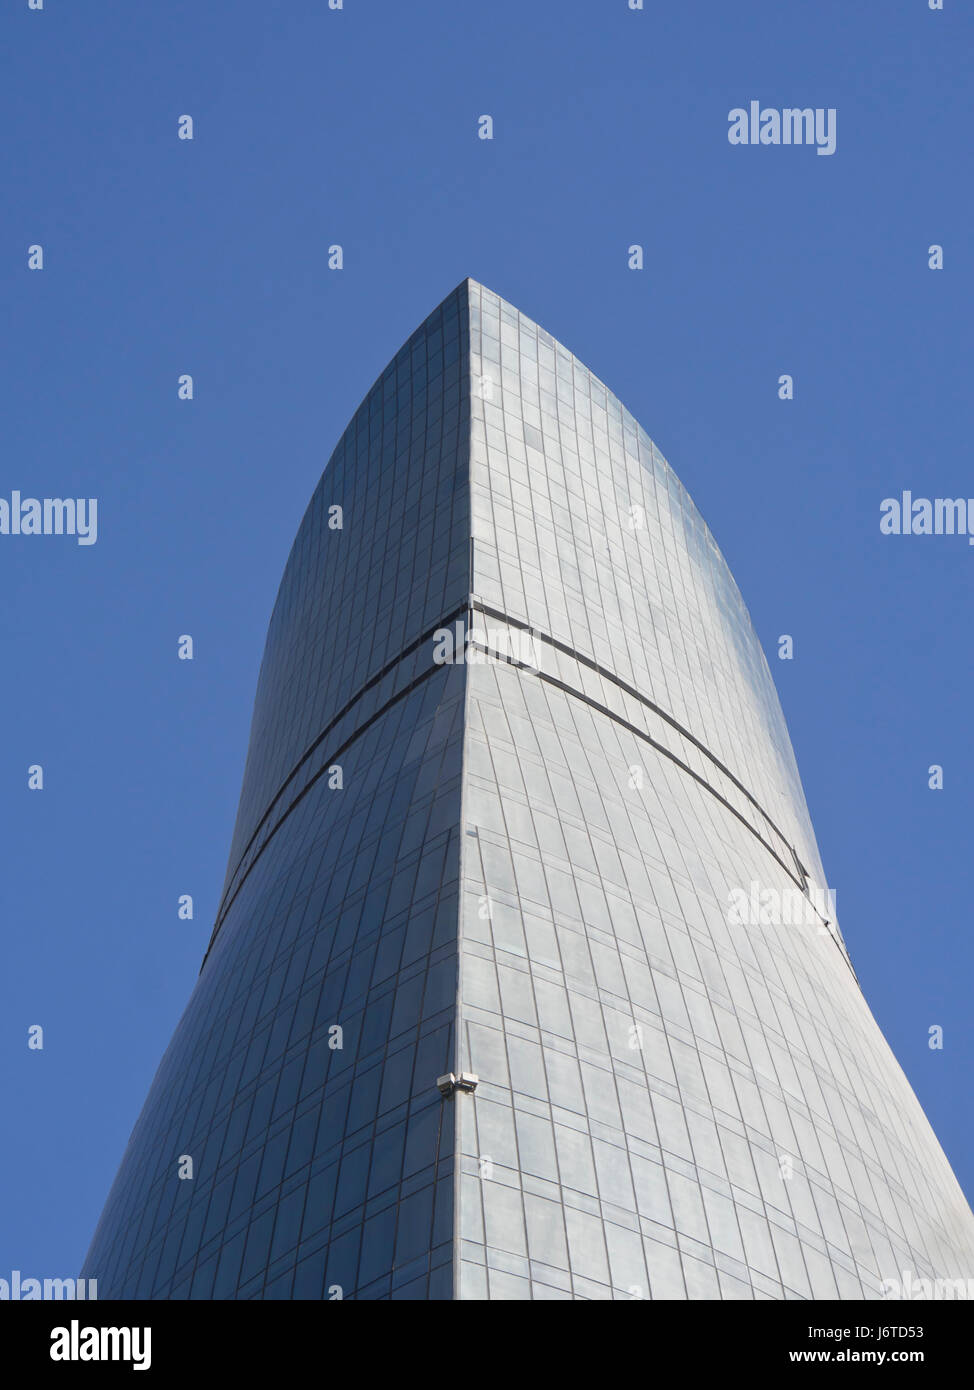 Looking up one of the Flame towers skyscrapers in Baku Azerbaijan, a towering landmark of modern architecture Stock Photo